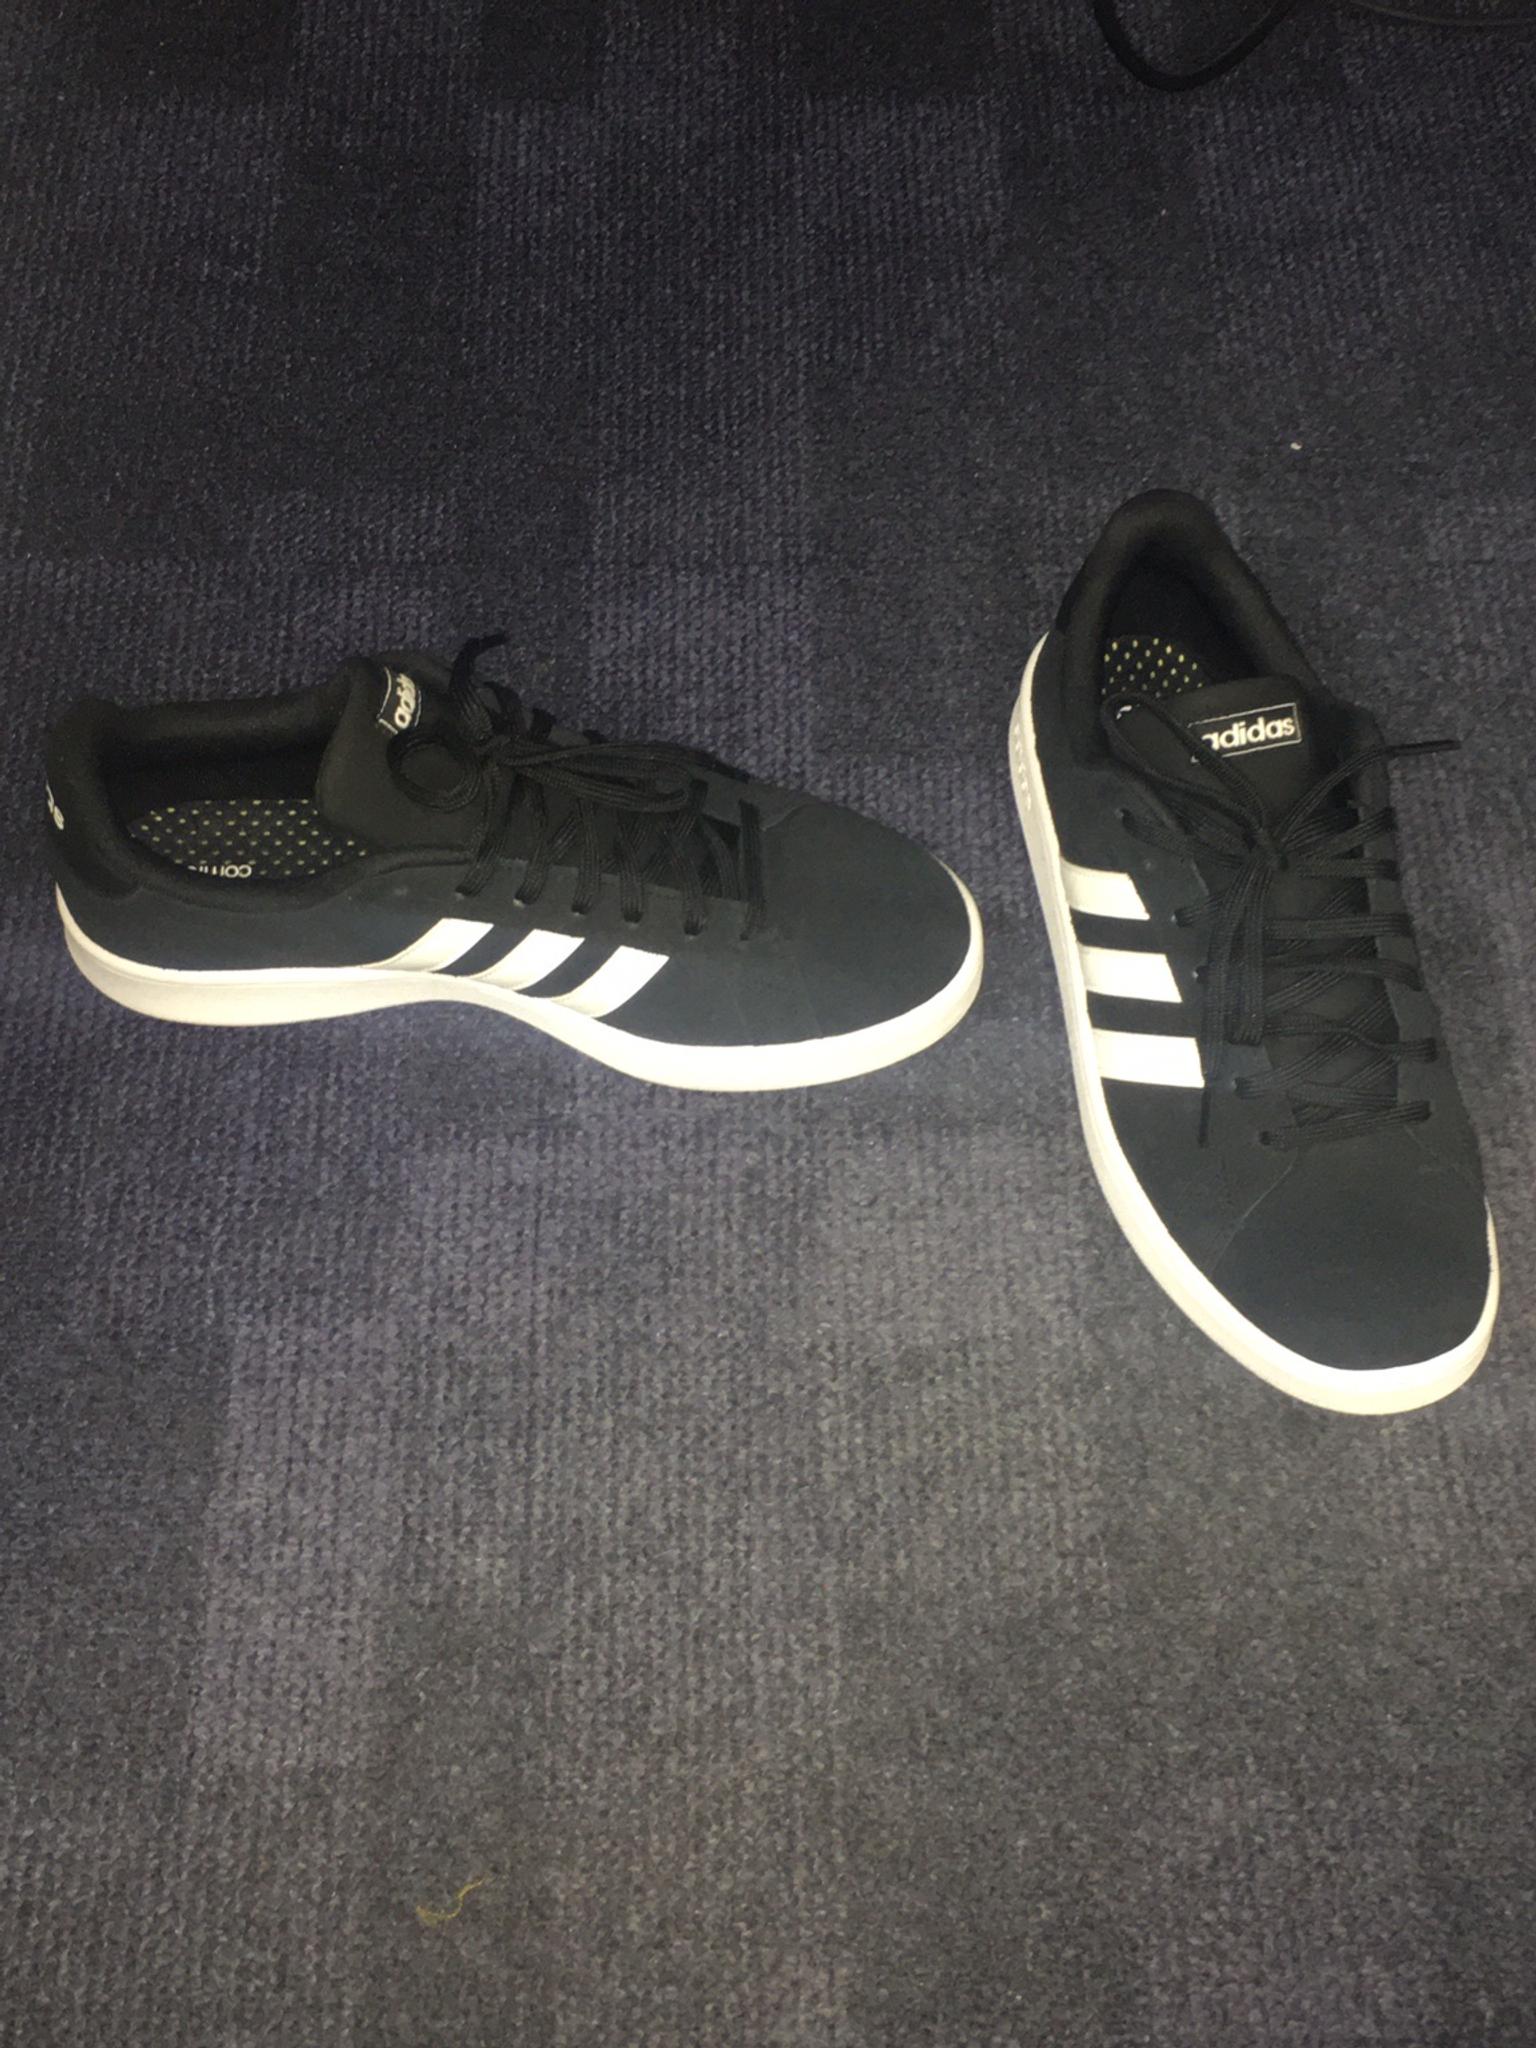 black adidas trainers size 9